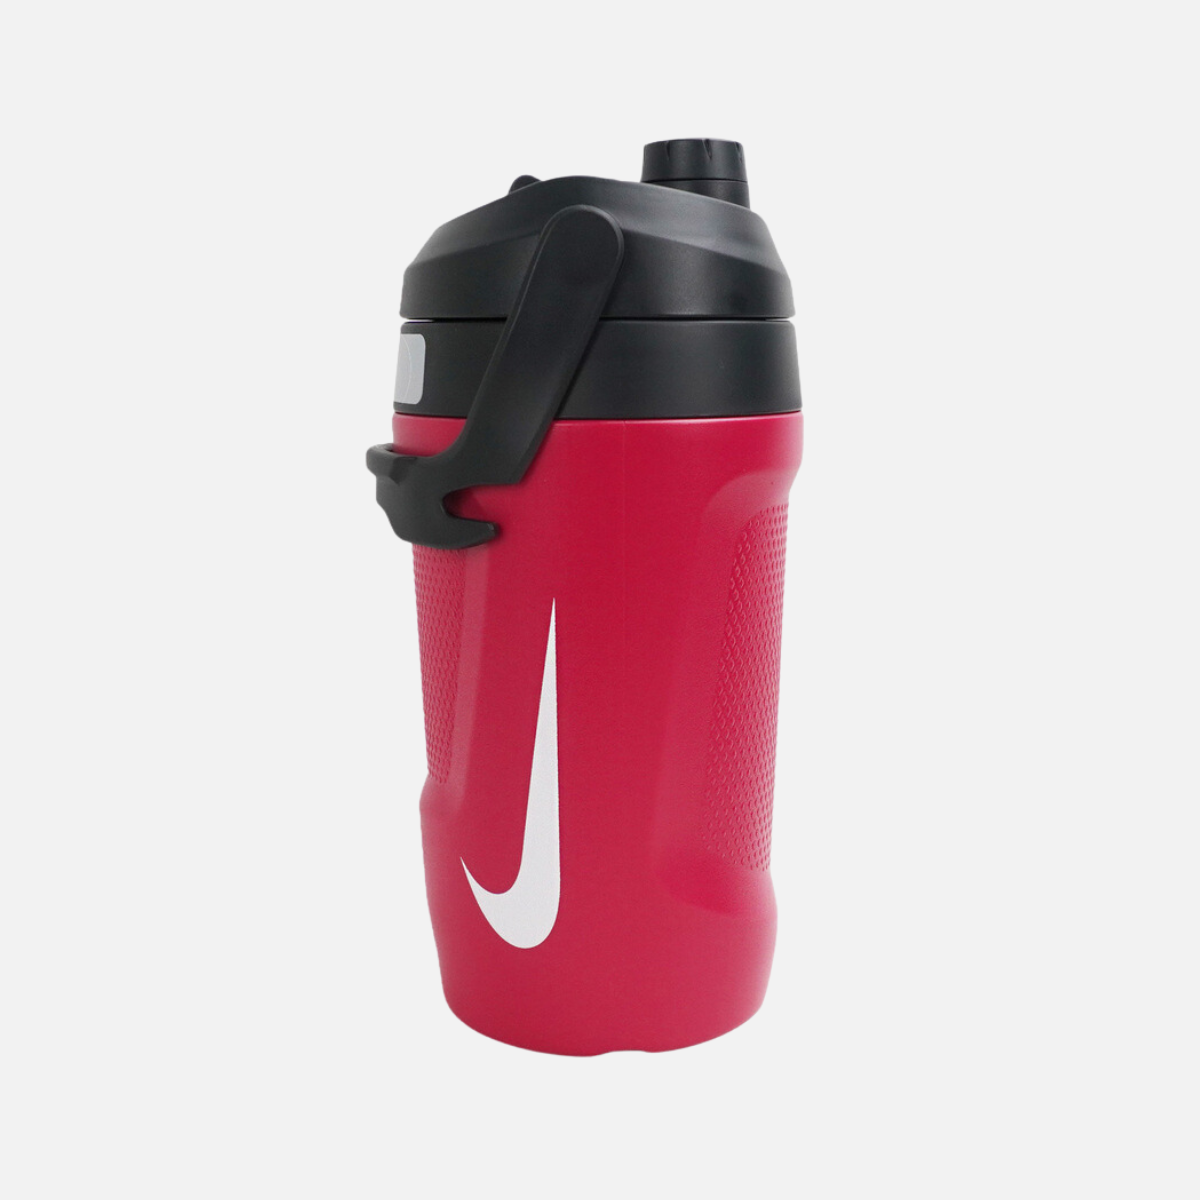 Nike Fuel Insulated Jug Sports Water Bottle - Pink 1.8L